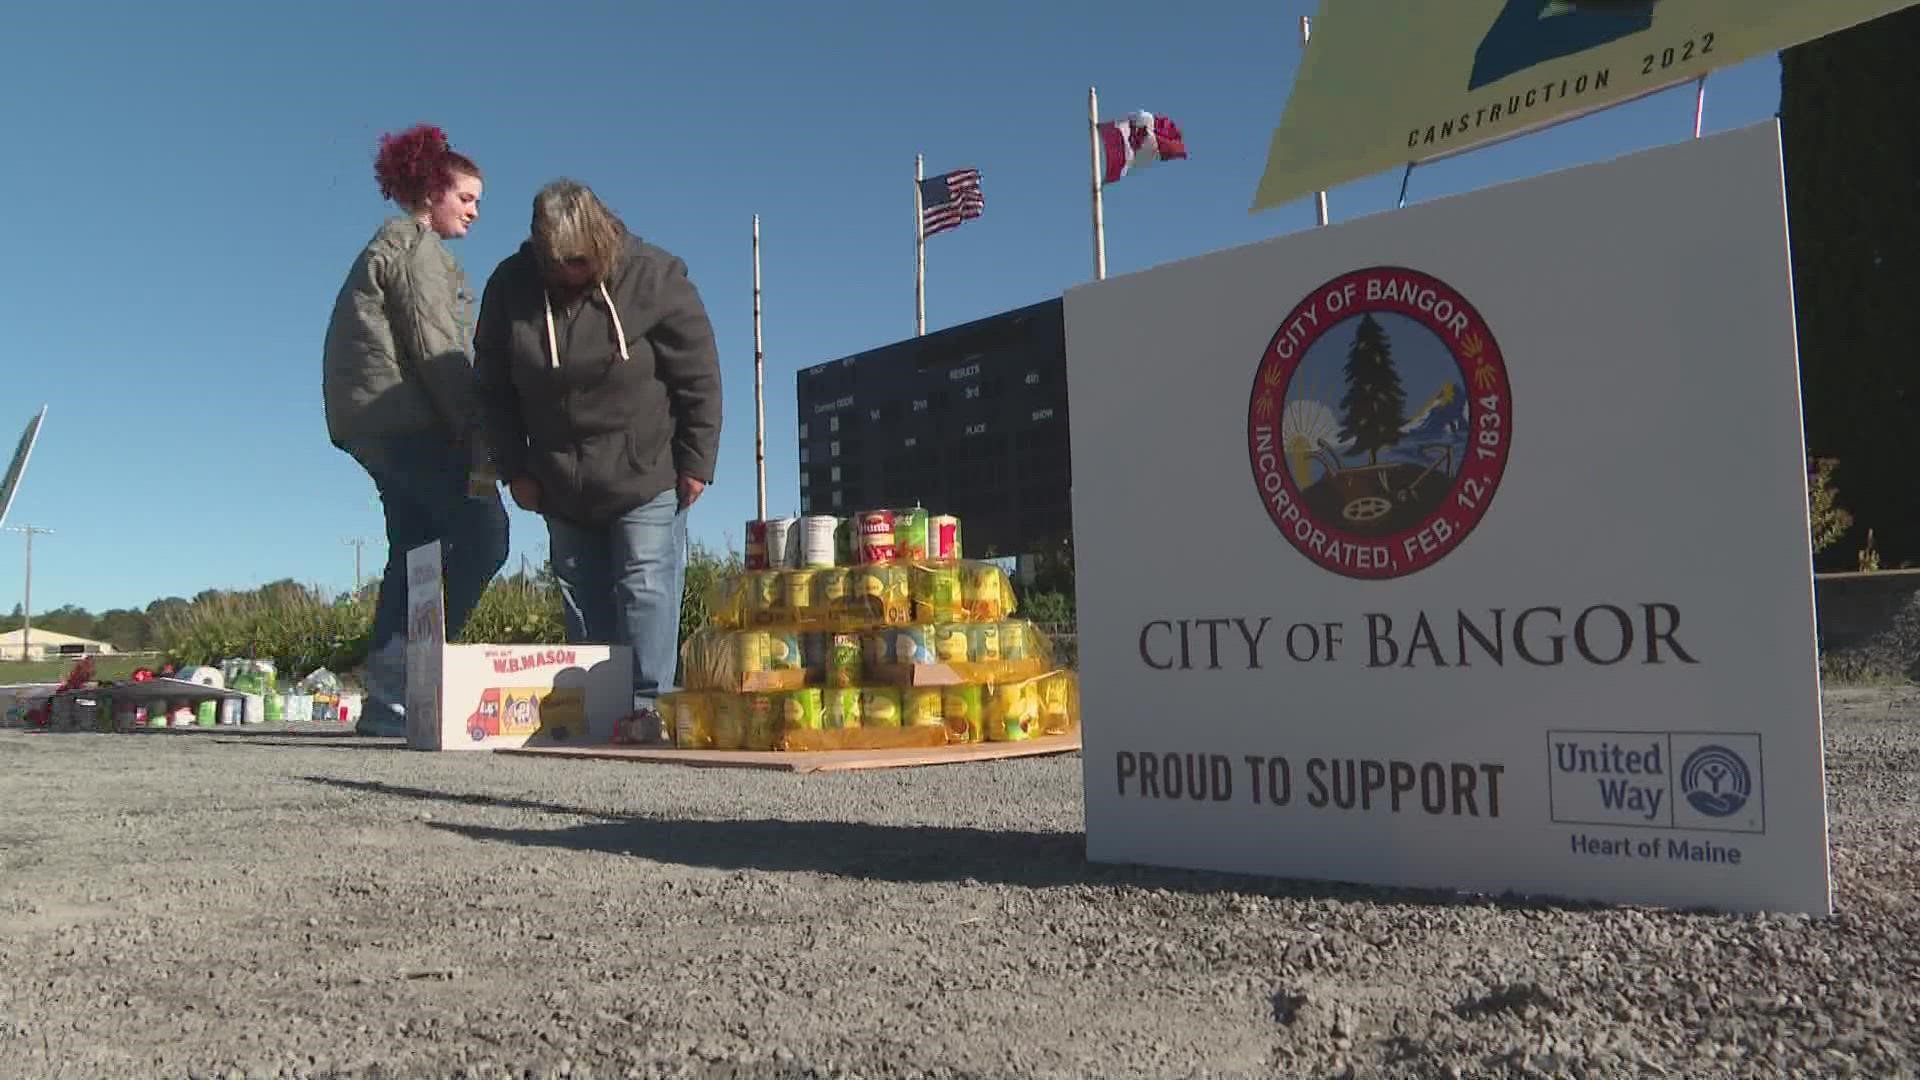 The can sculptures took shapes such as beehives, the state of Maine, and local logos. All canned goods went directly toward feeding Mainers after the event.